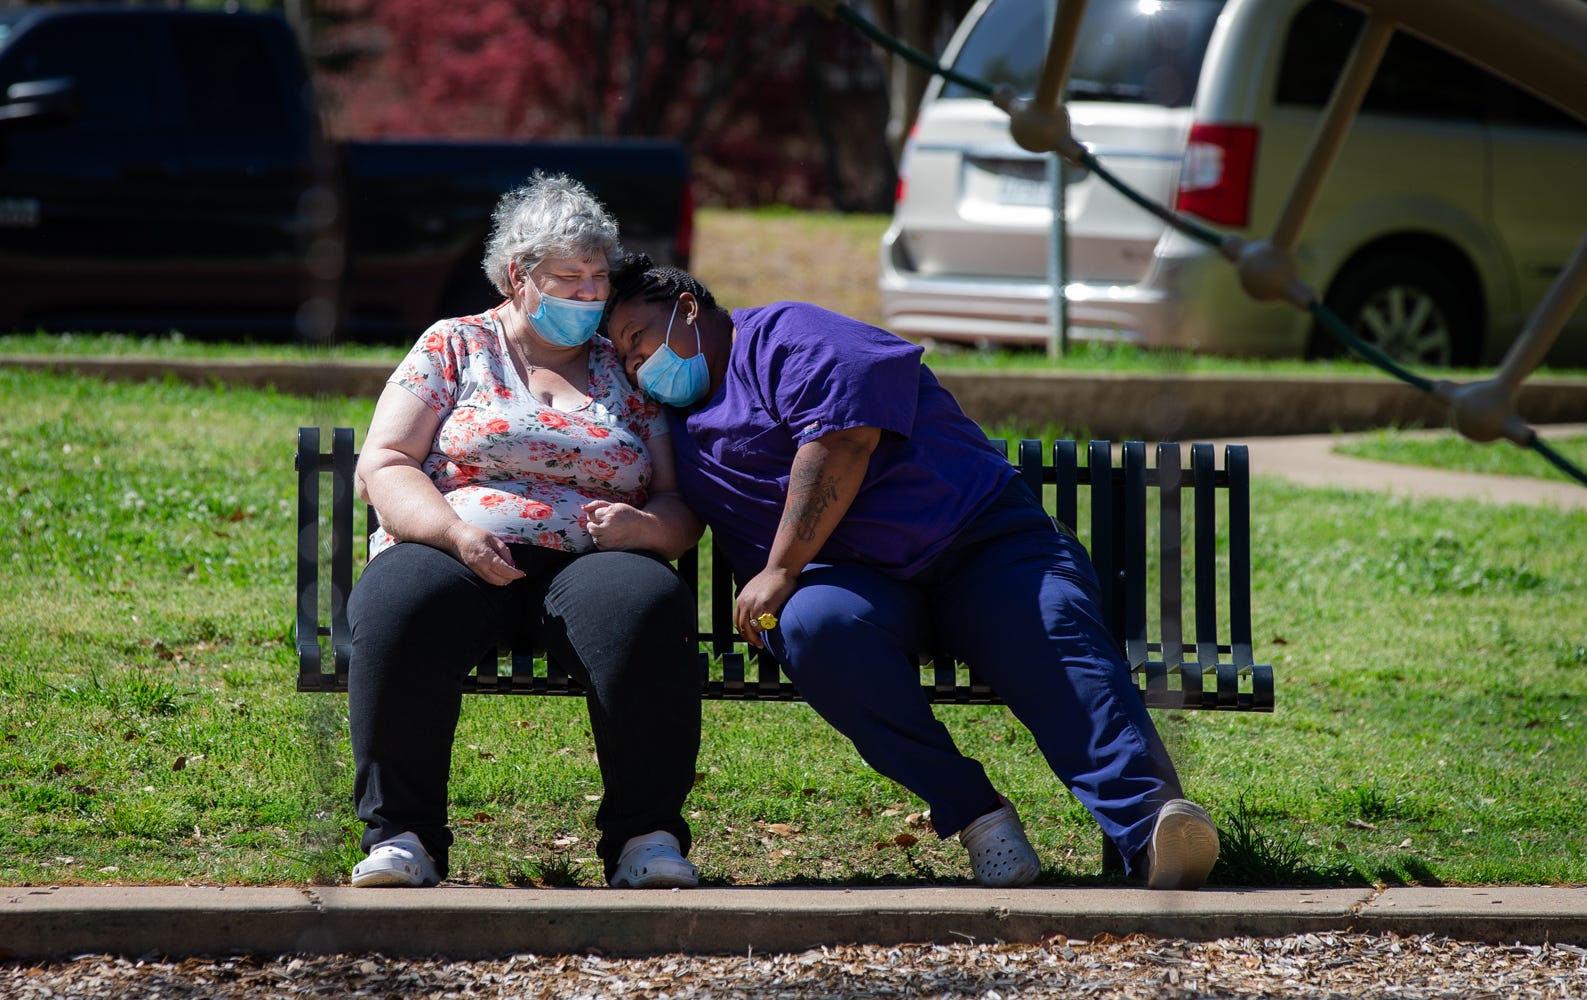 Caregiver Tre'Asia Anderson shares a laugh with client Constance while relaxing at Bergfeld Park in Tyler on April 6.